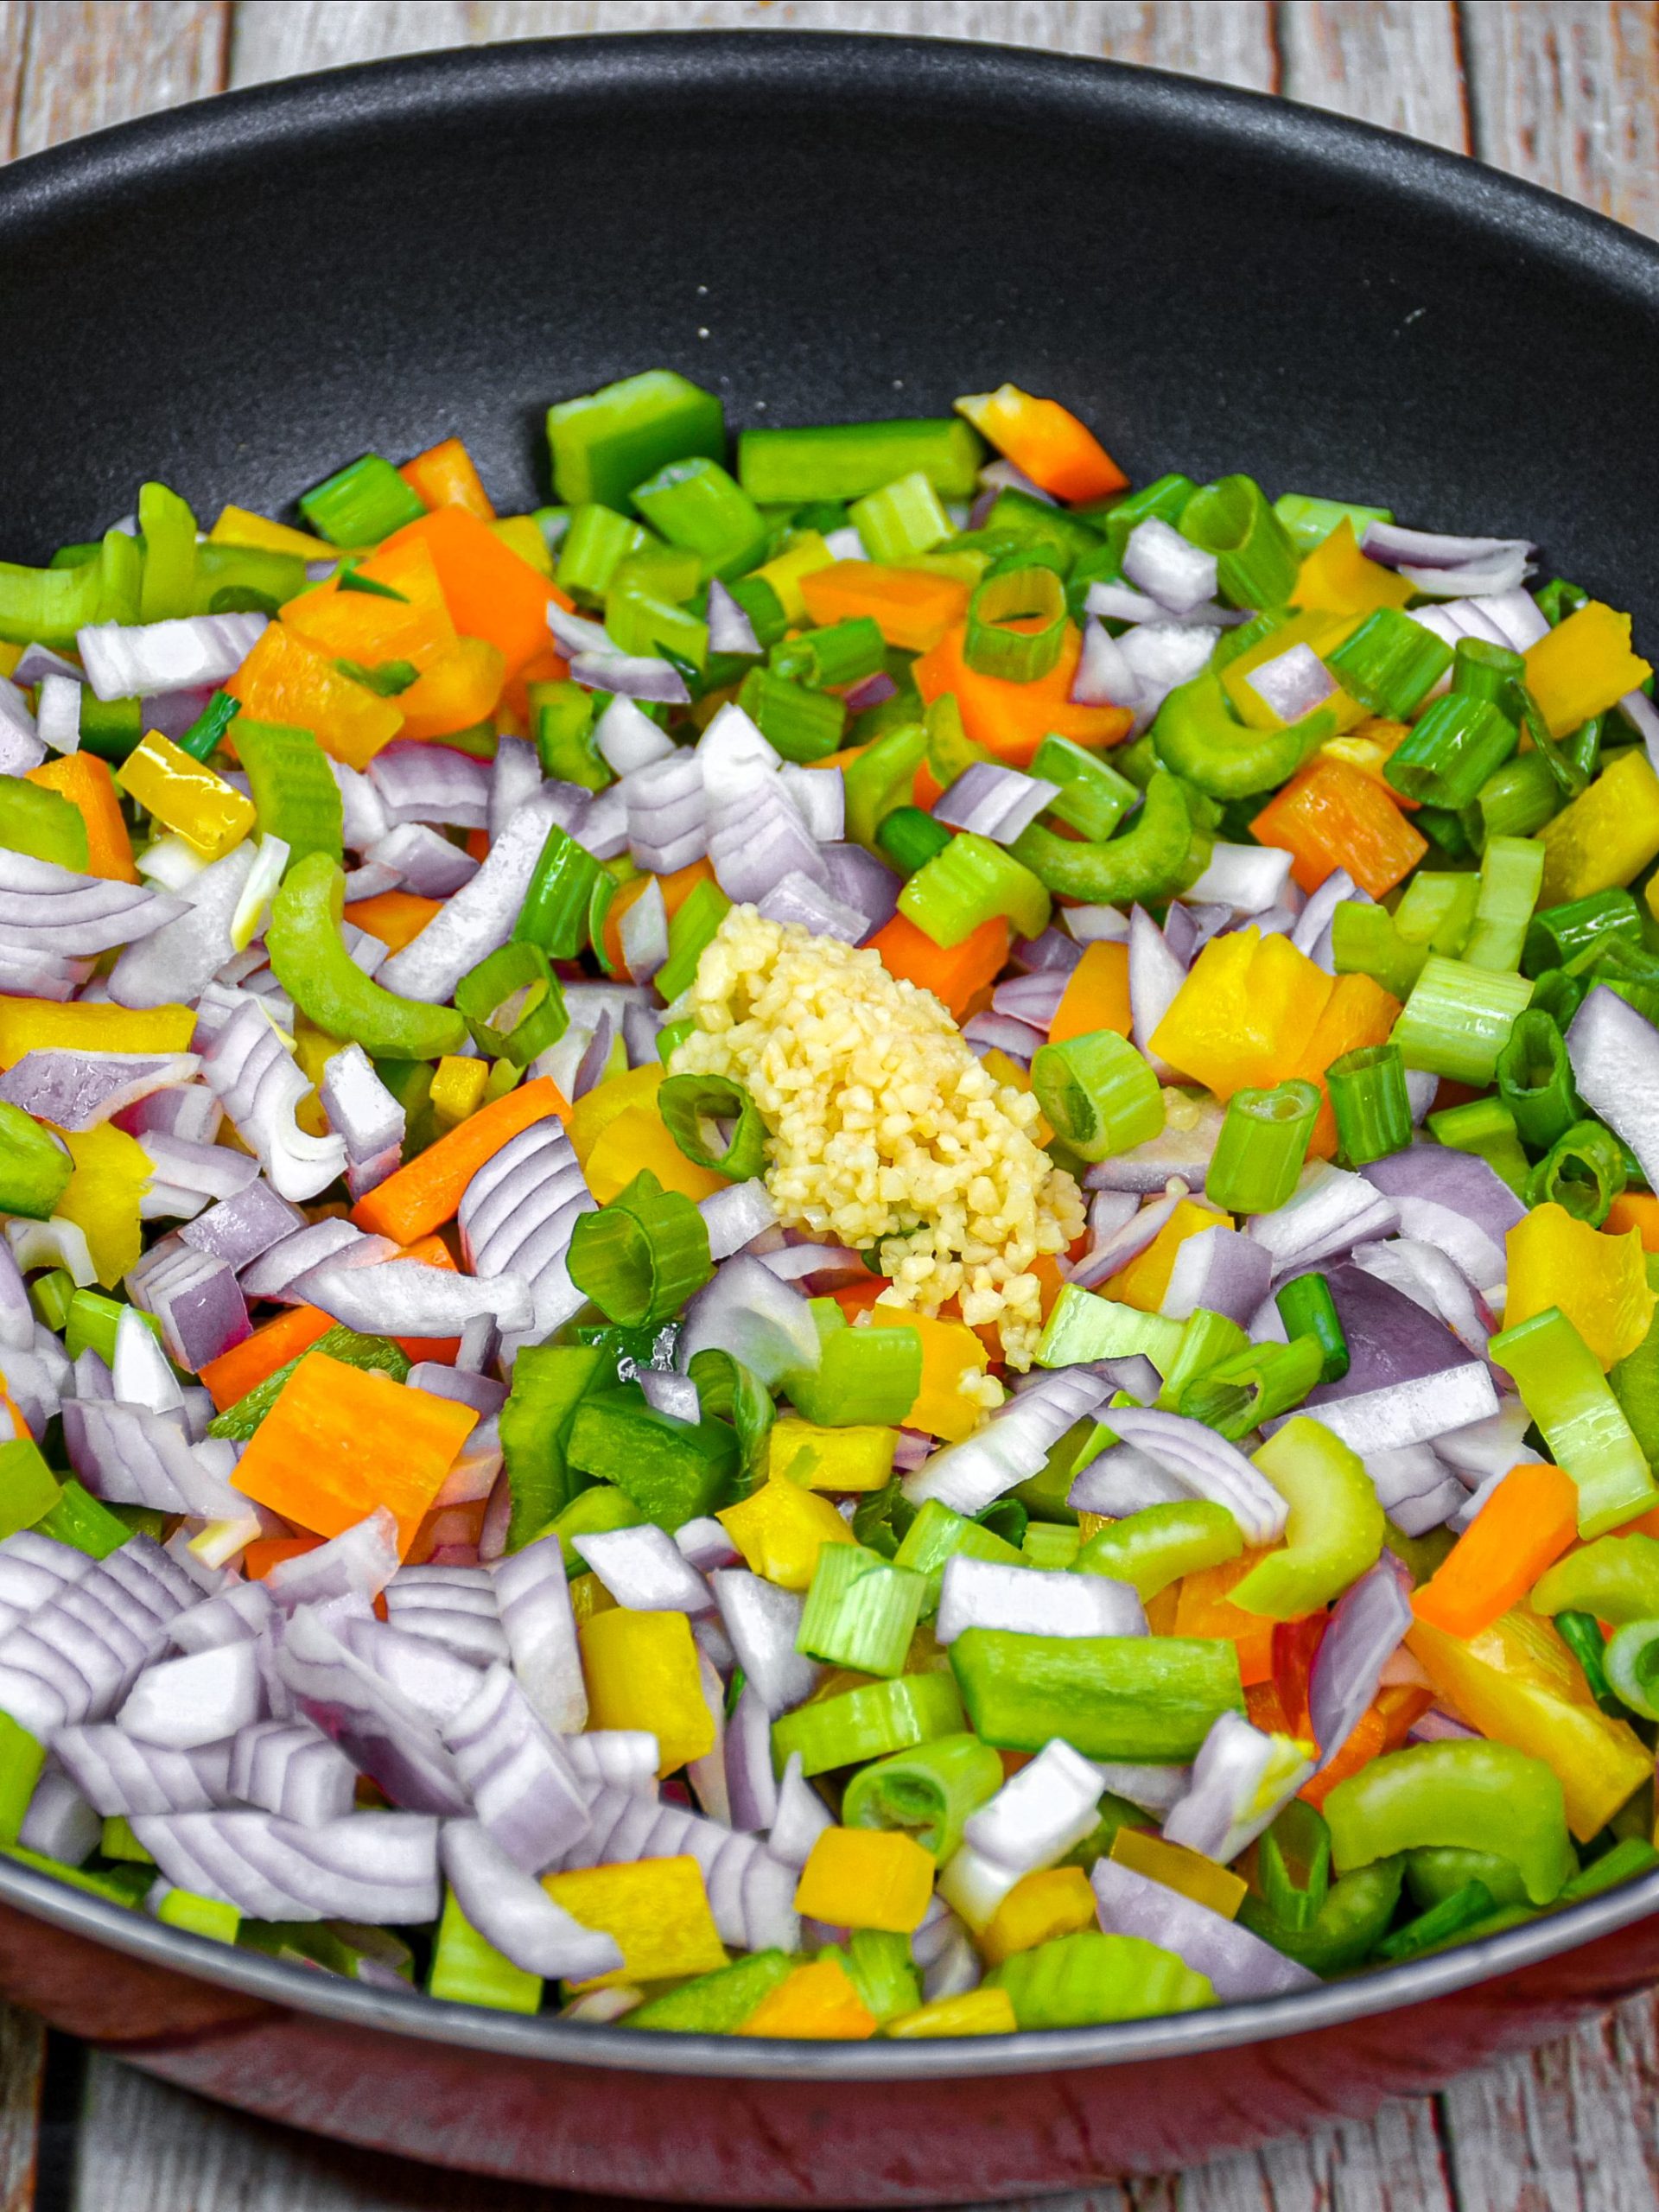 Add the onions, peppers, minced, garlic and celery to the saute pan.